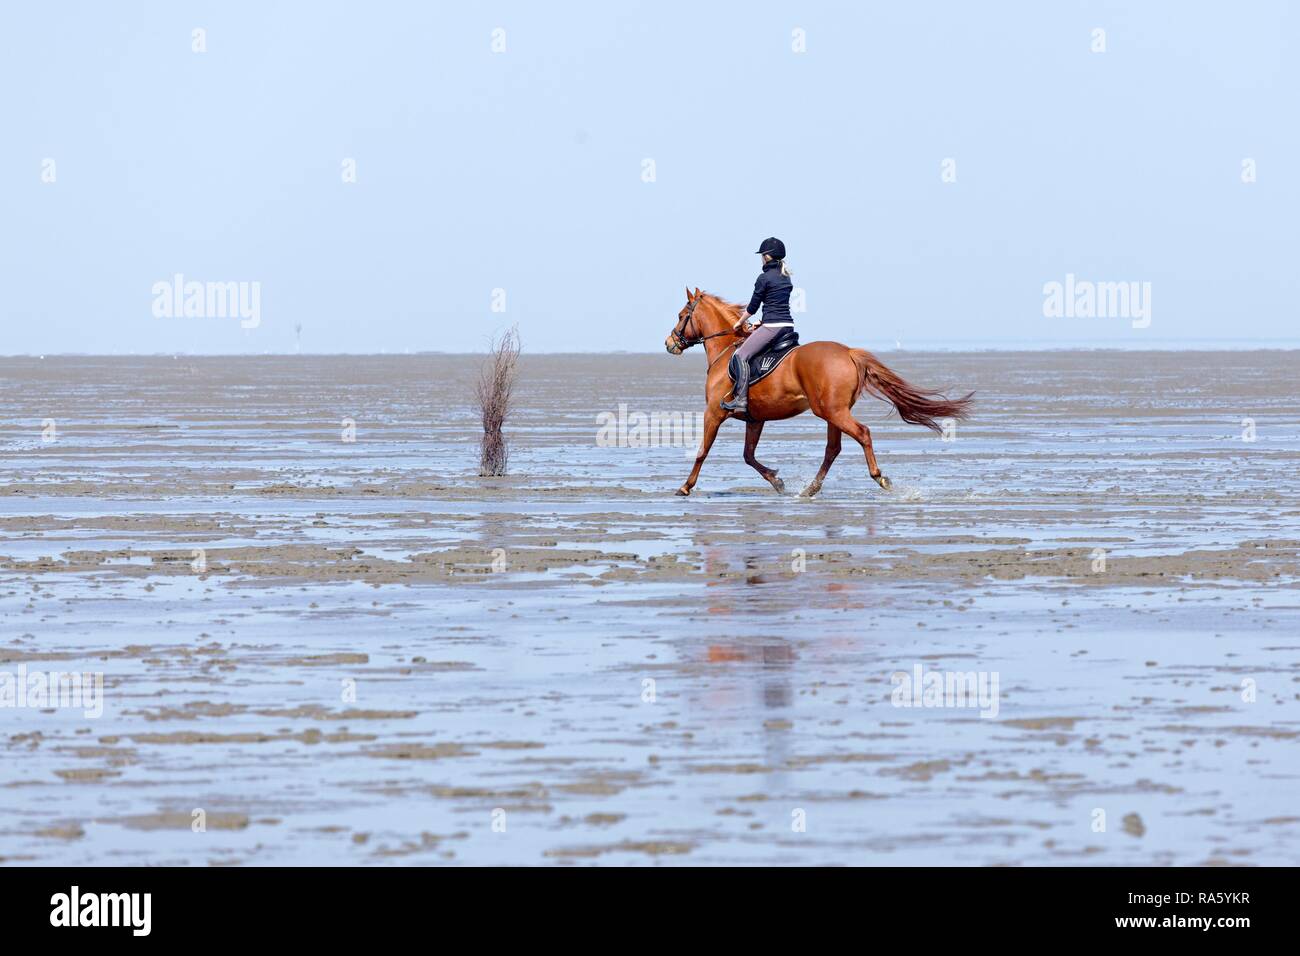 Horseriding in the mudflats, Duhnen, Cuxhaven, Lower Saxony, Germany Stock Photo